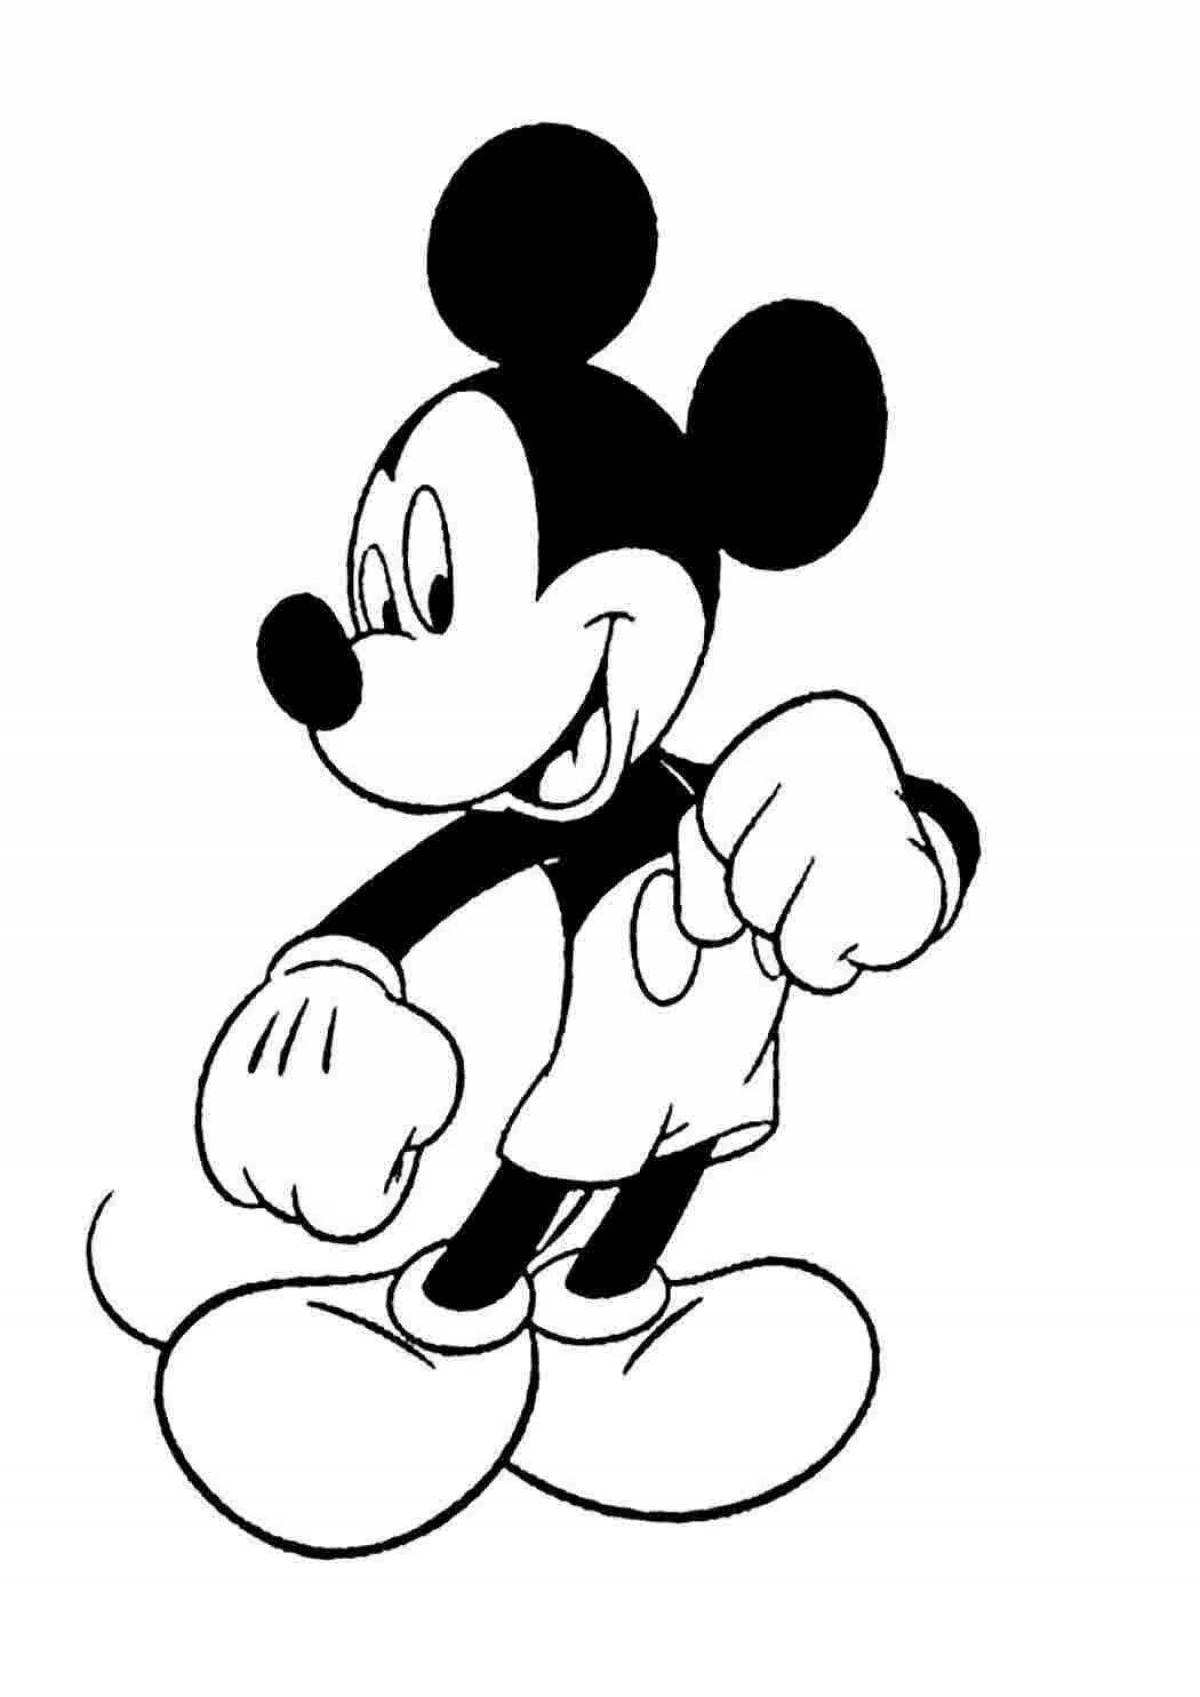 Exquisite mickey mouse coloring book for boys